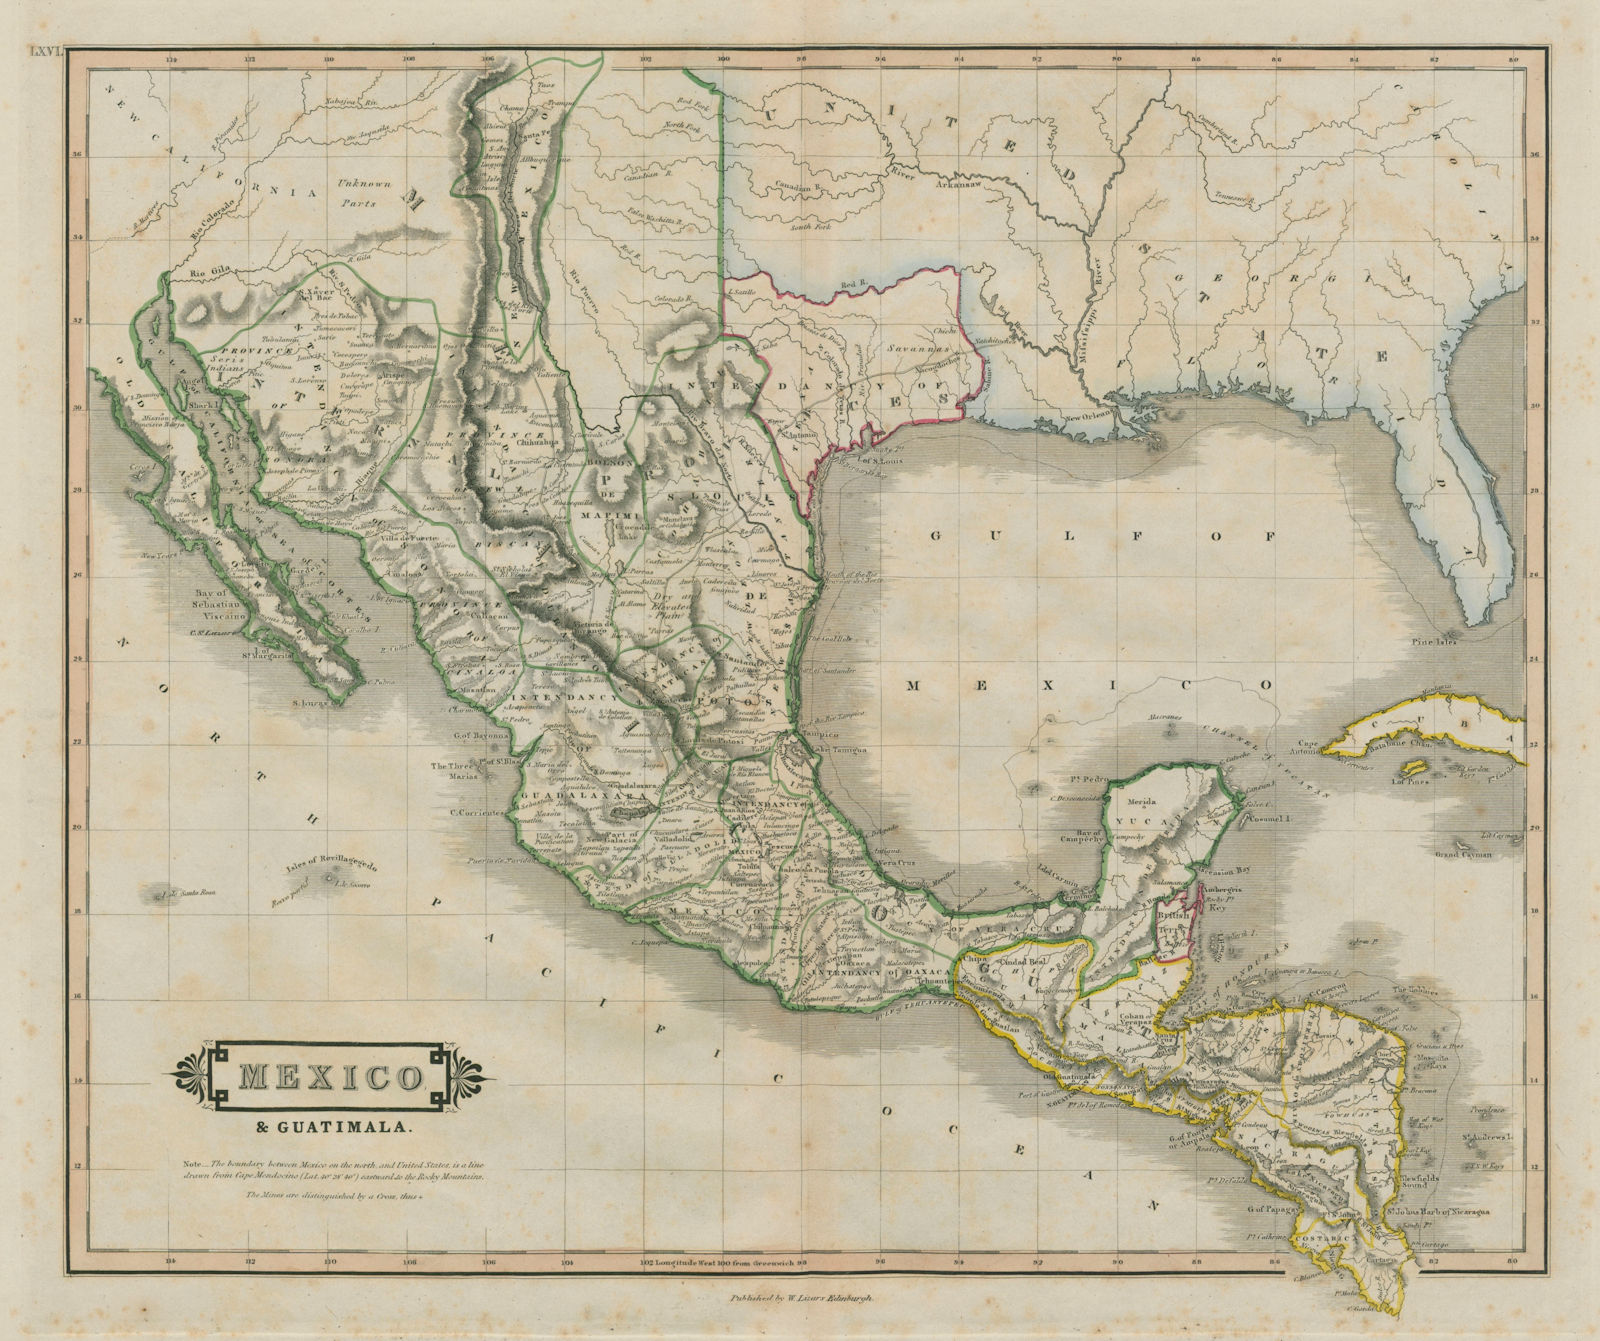 Mexico & Guatimala with the Republic of Texas. LIZARS 1842 old antique map